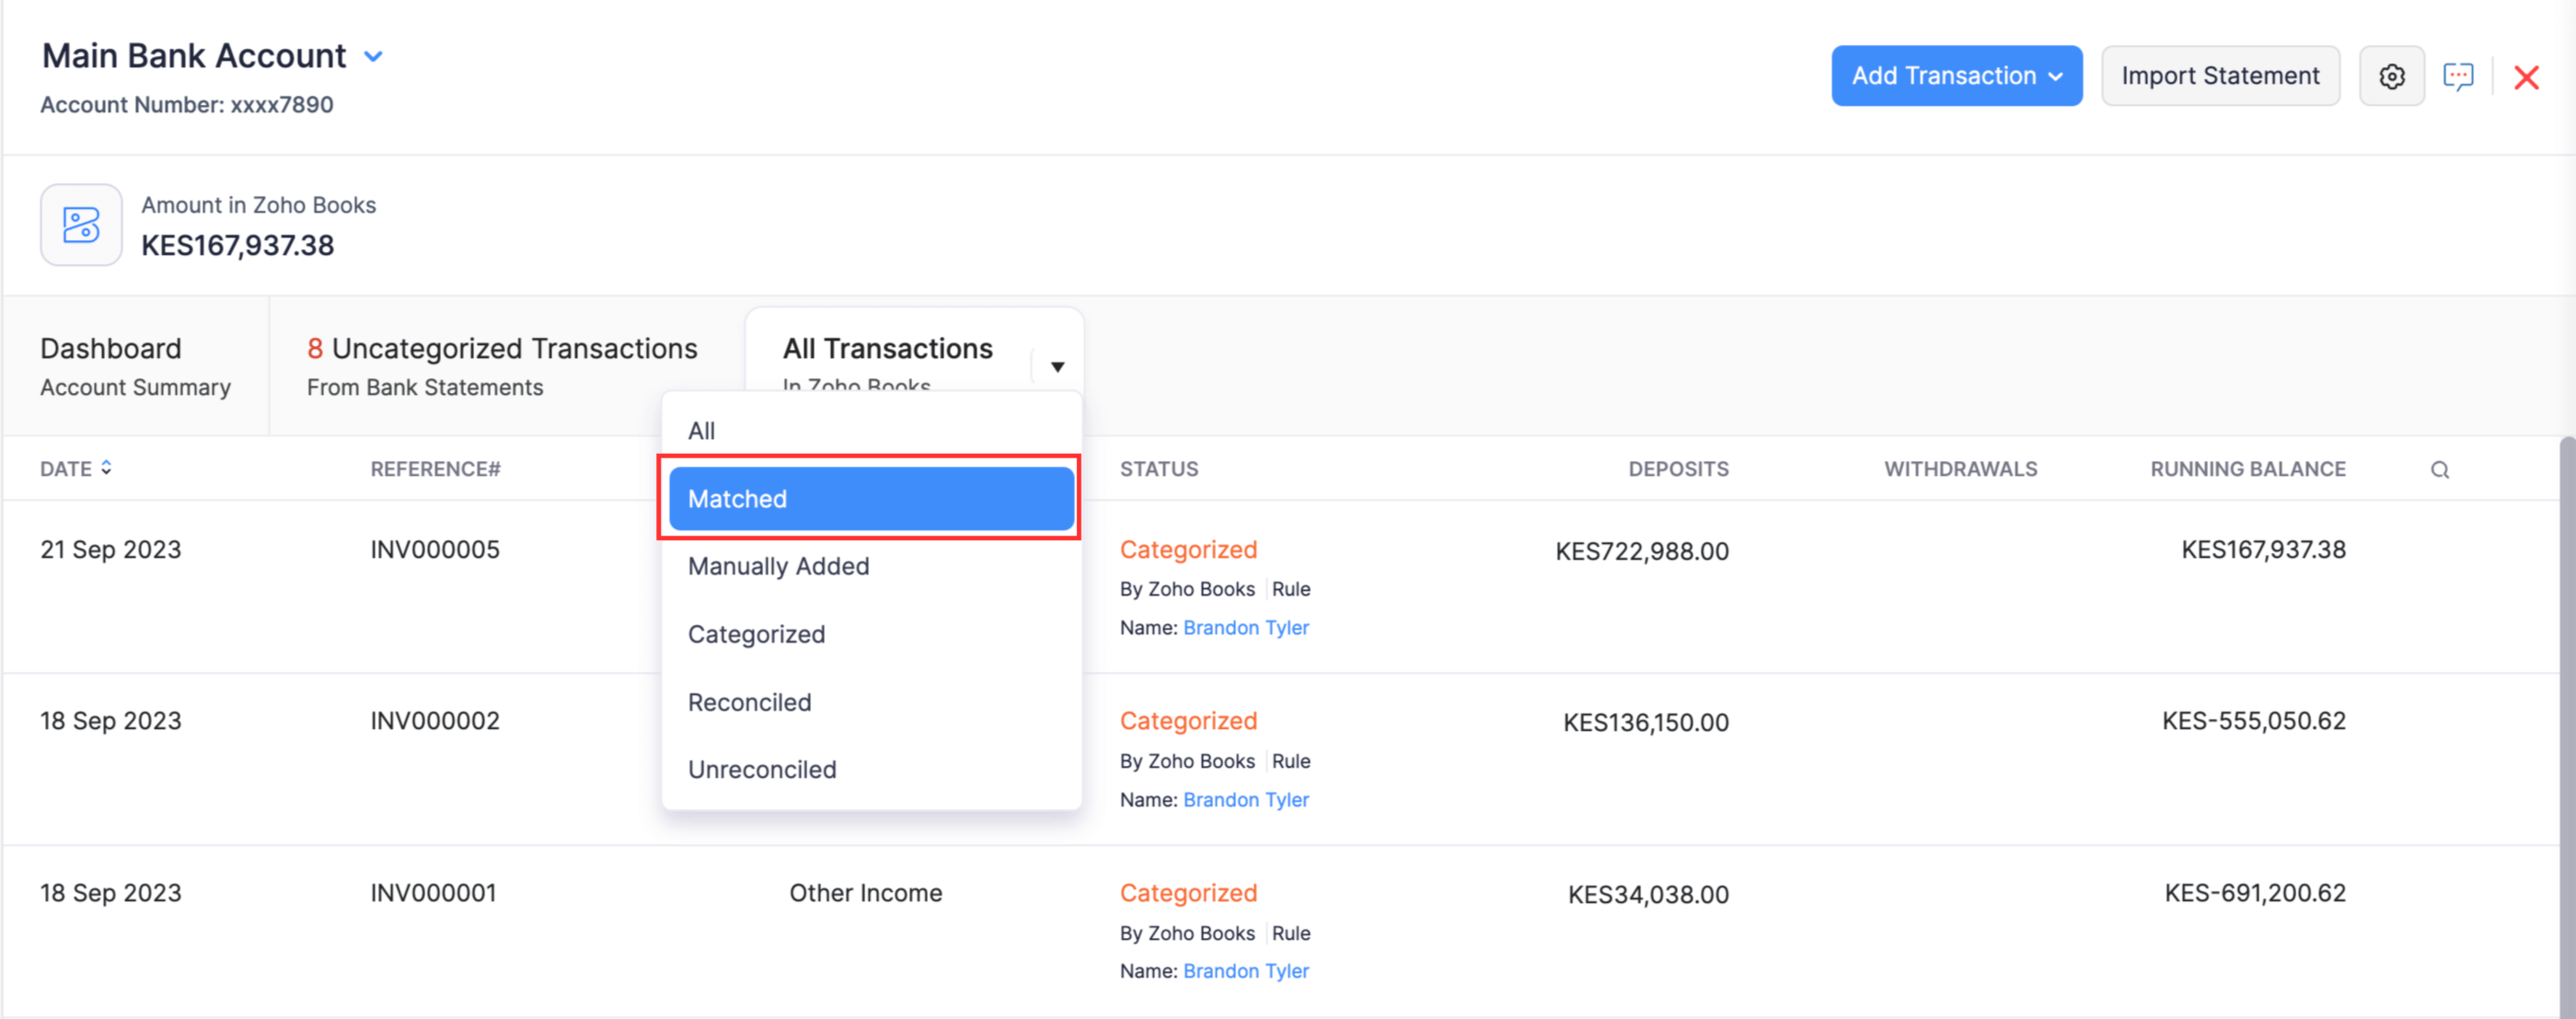 Click Matched from the All Transactions dropdown